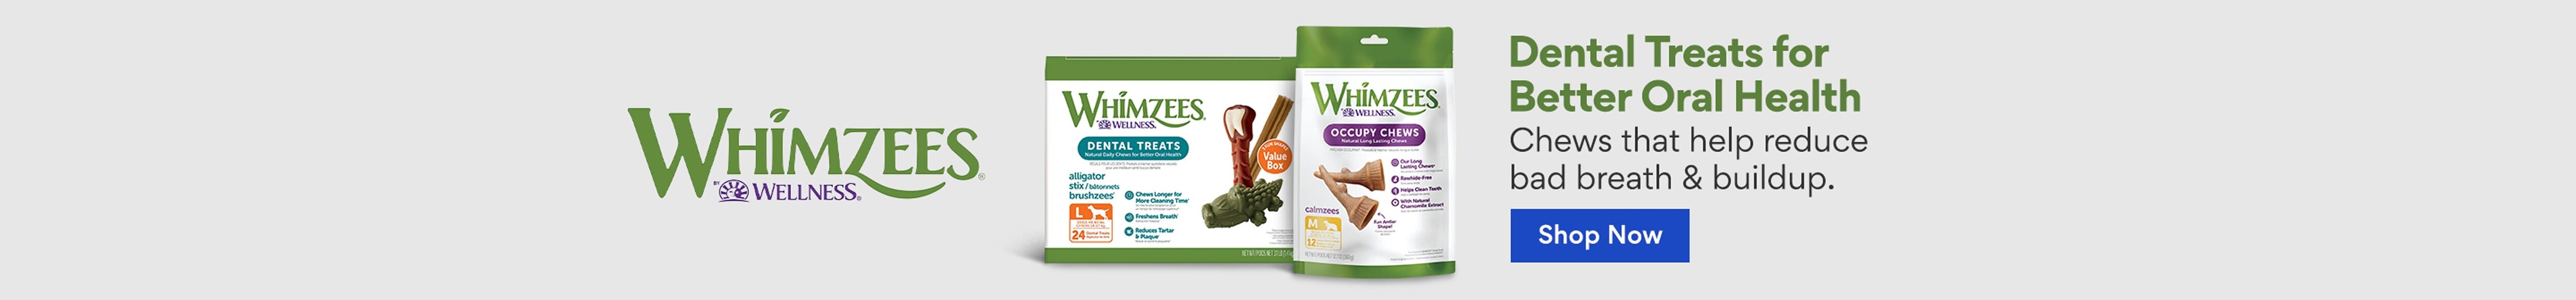 Whimzees. Dental treats for better oral health. Chews that help reduce bad breath & buildup.